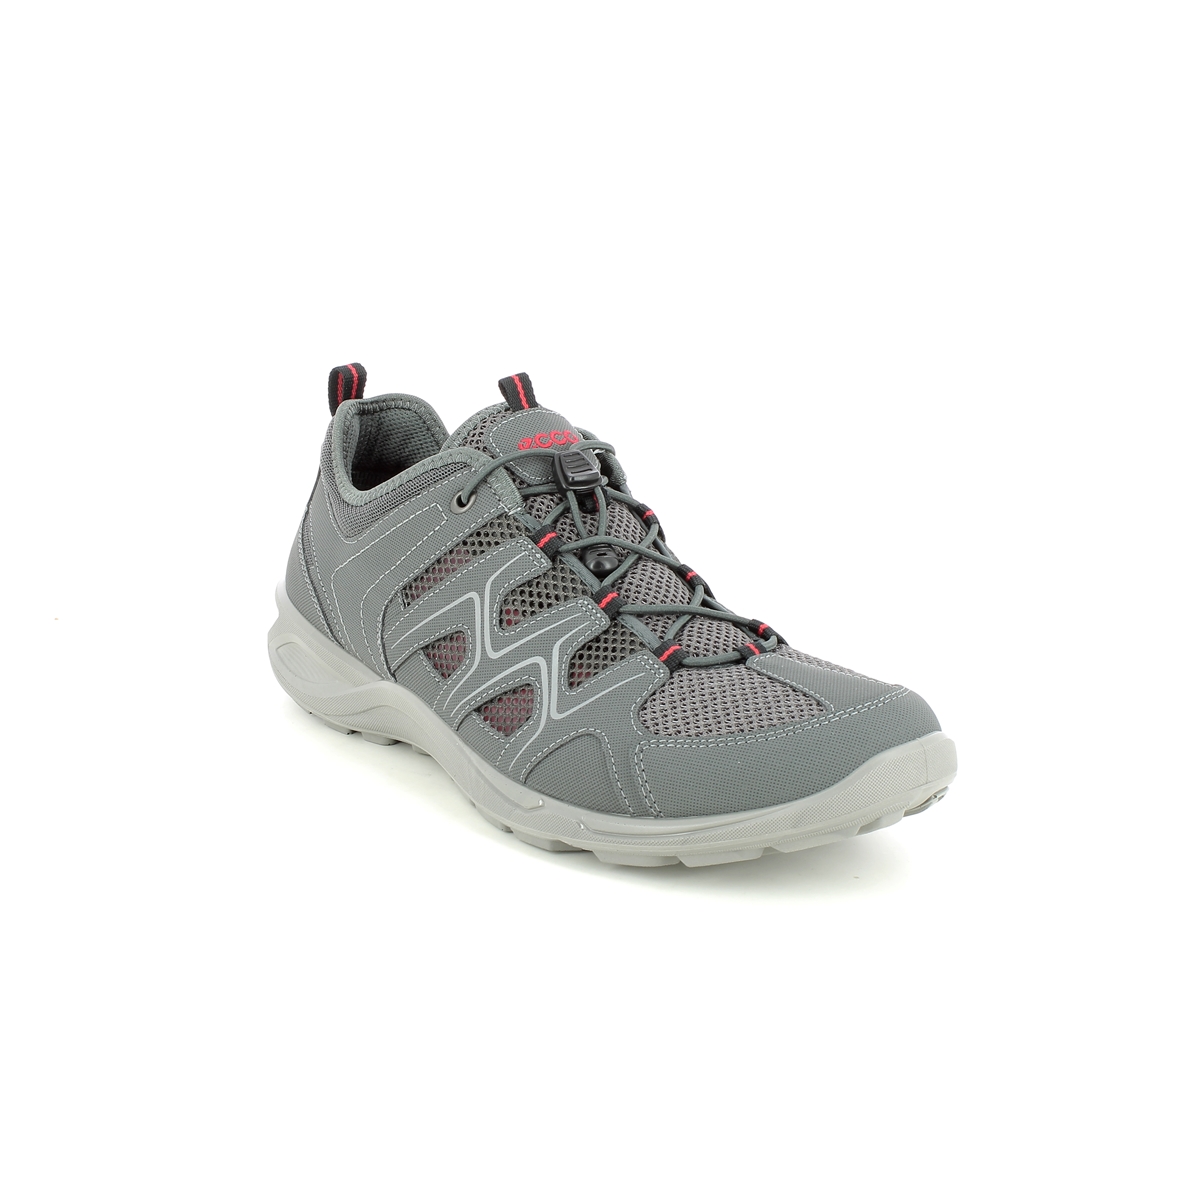 Ecco Terracruise Lt Grey Mens Trainers 825774-56586 In Size 45 In Plain Grey